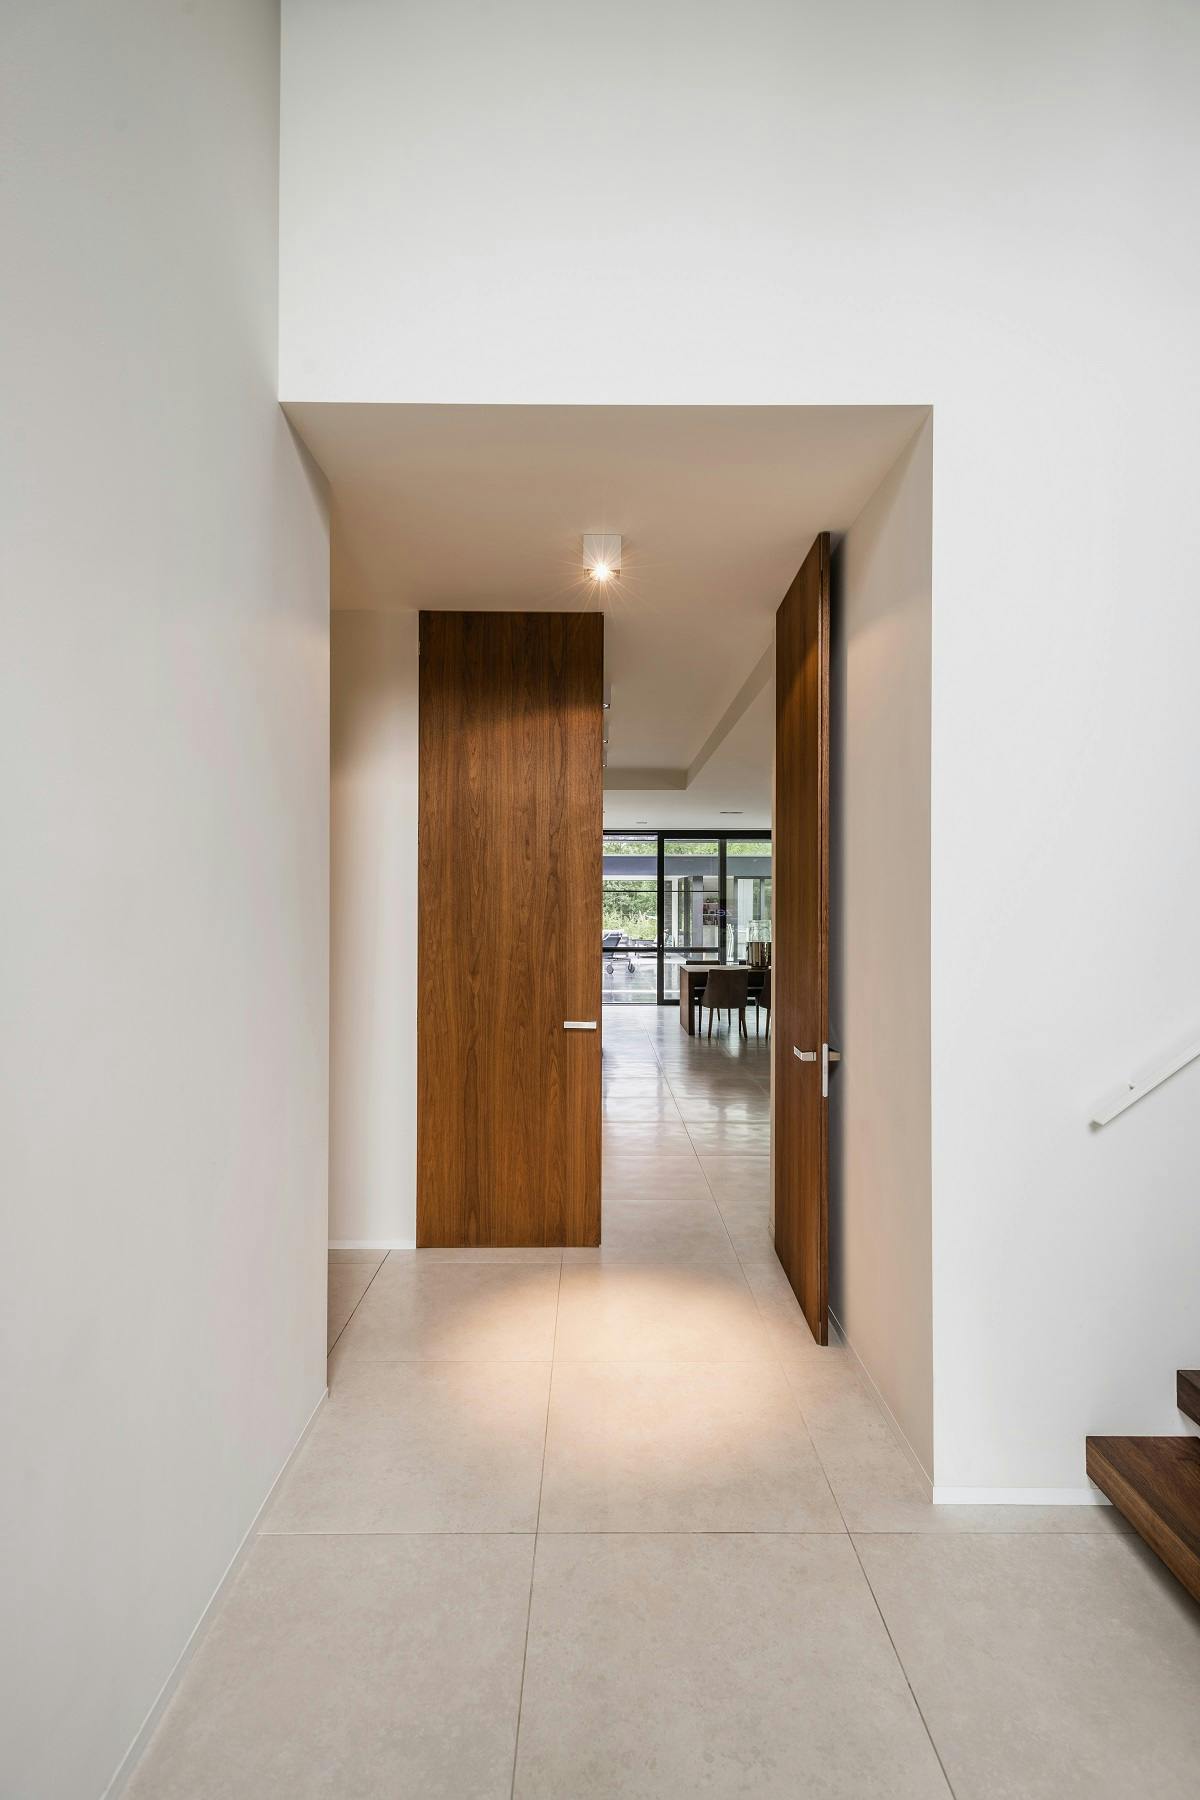 A white reception with tiled floor and foot of wooden stairs, with corridor leading to wooden double flush doors with one door open leading to living area.